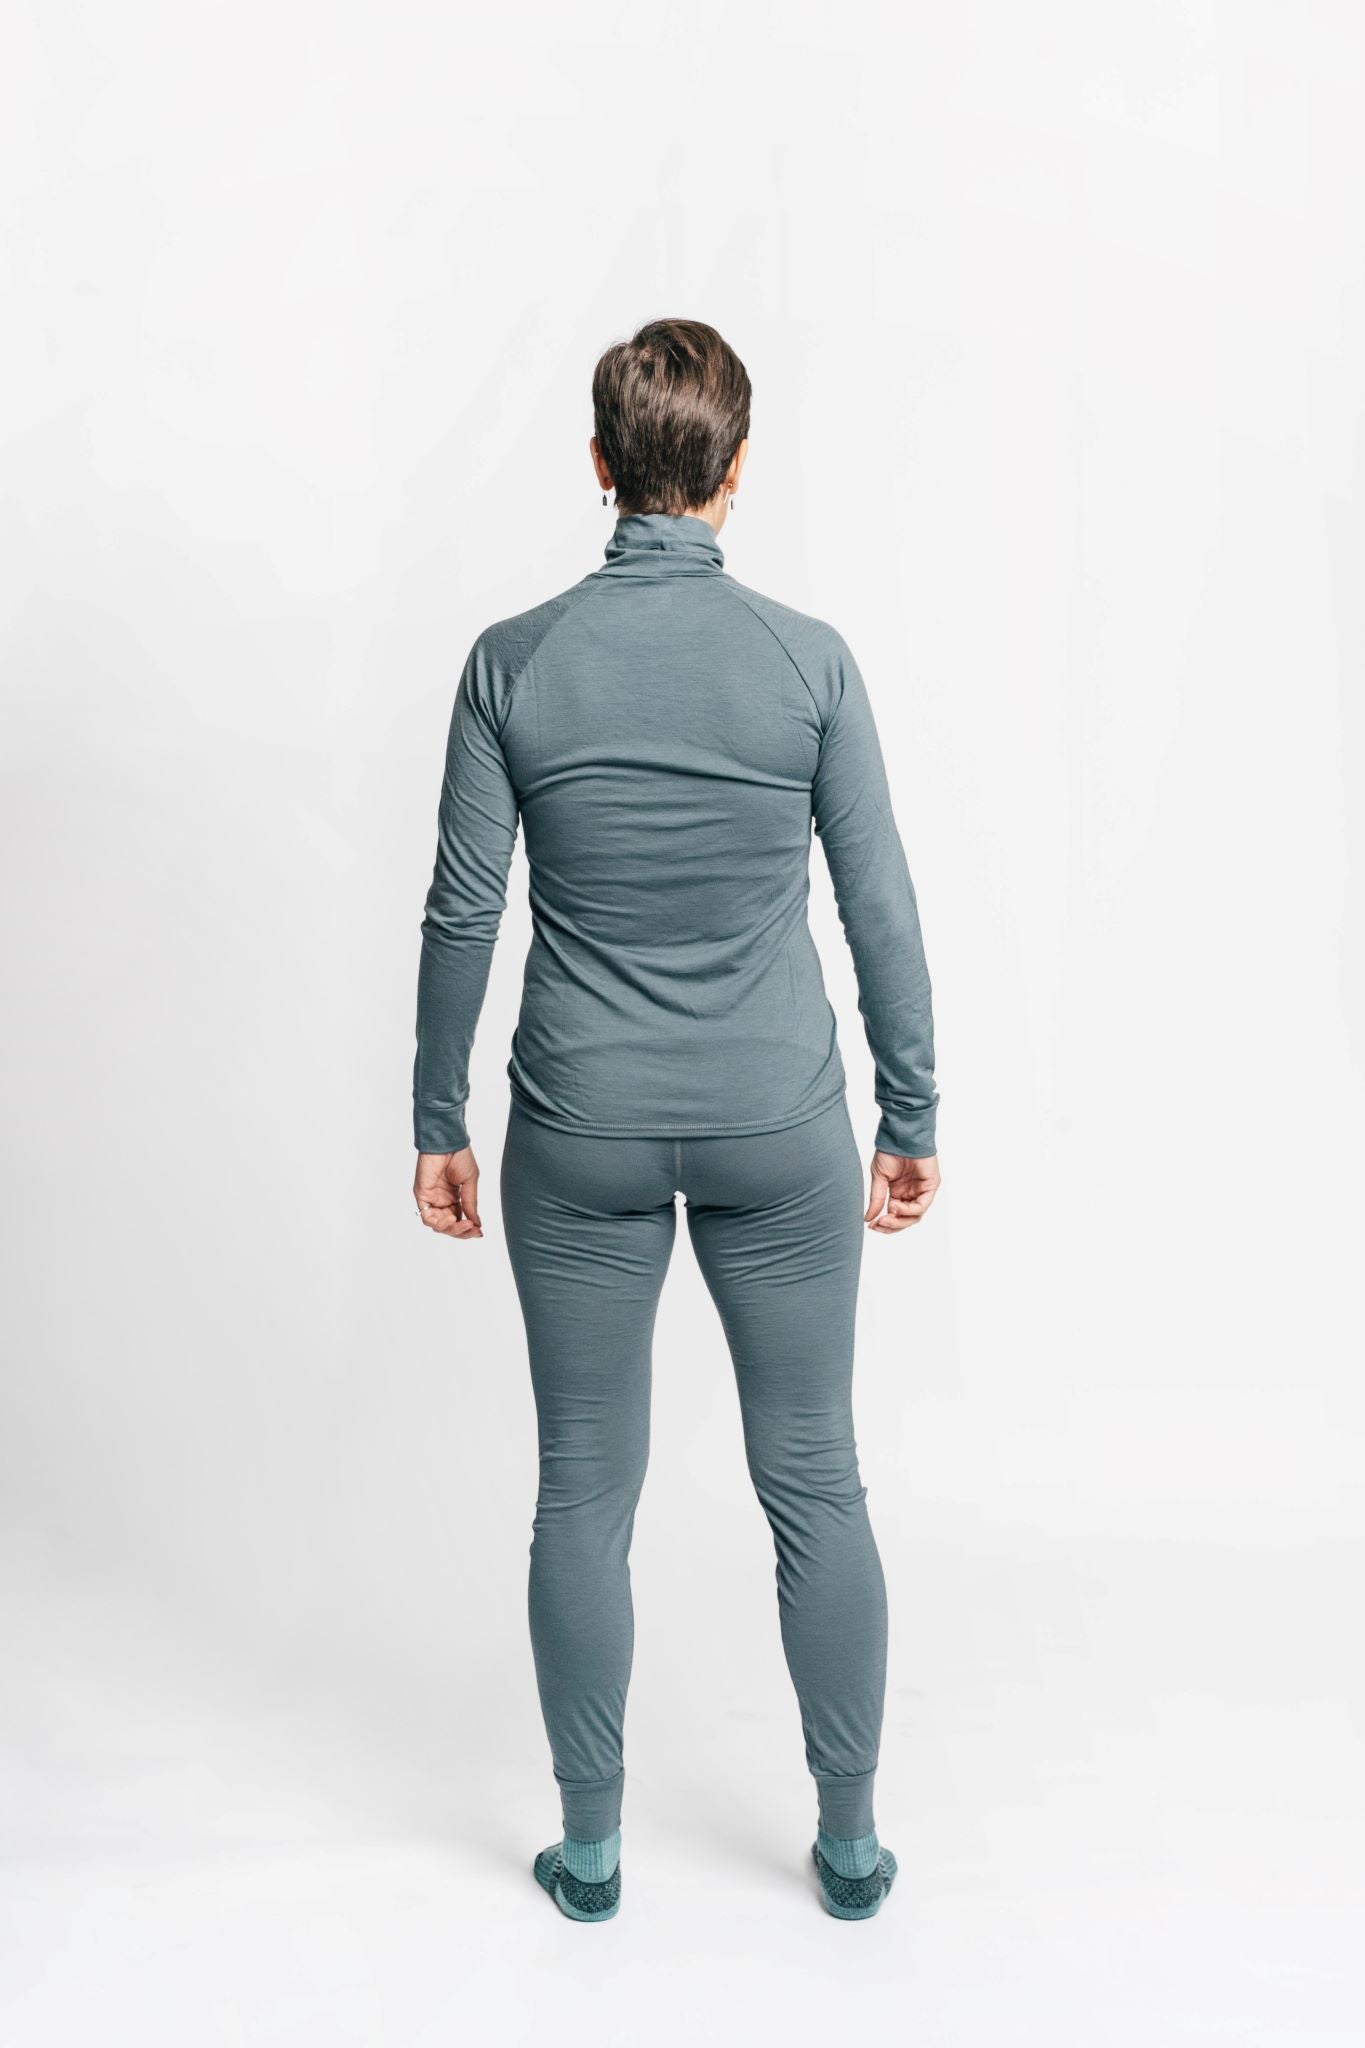 alpine fit merino wool base layer top and bottom on model back